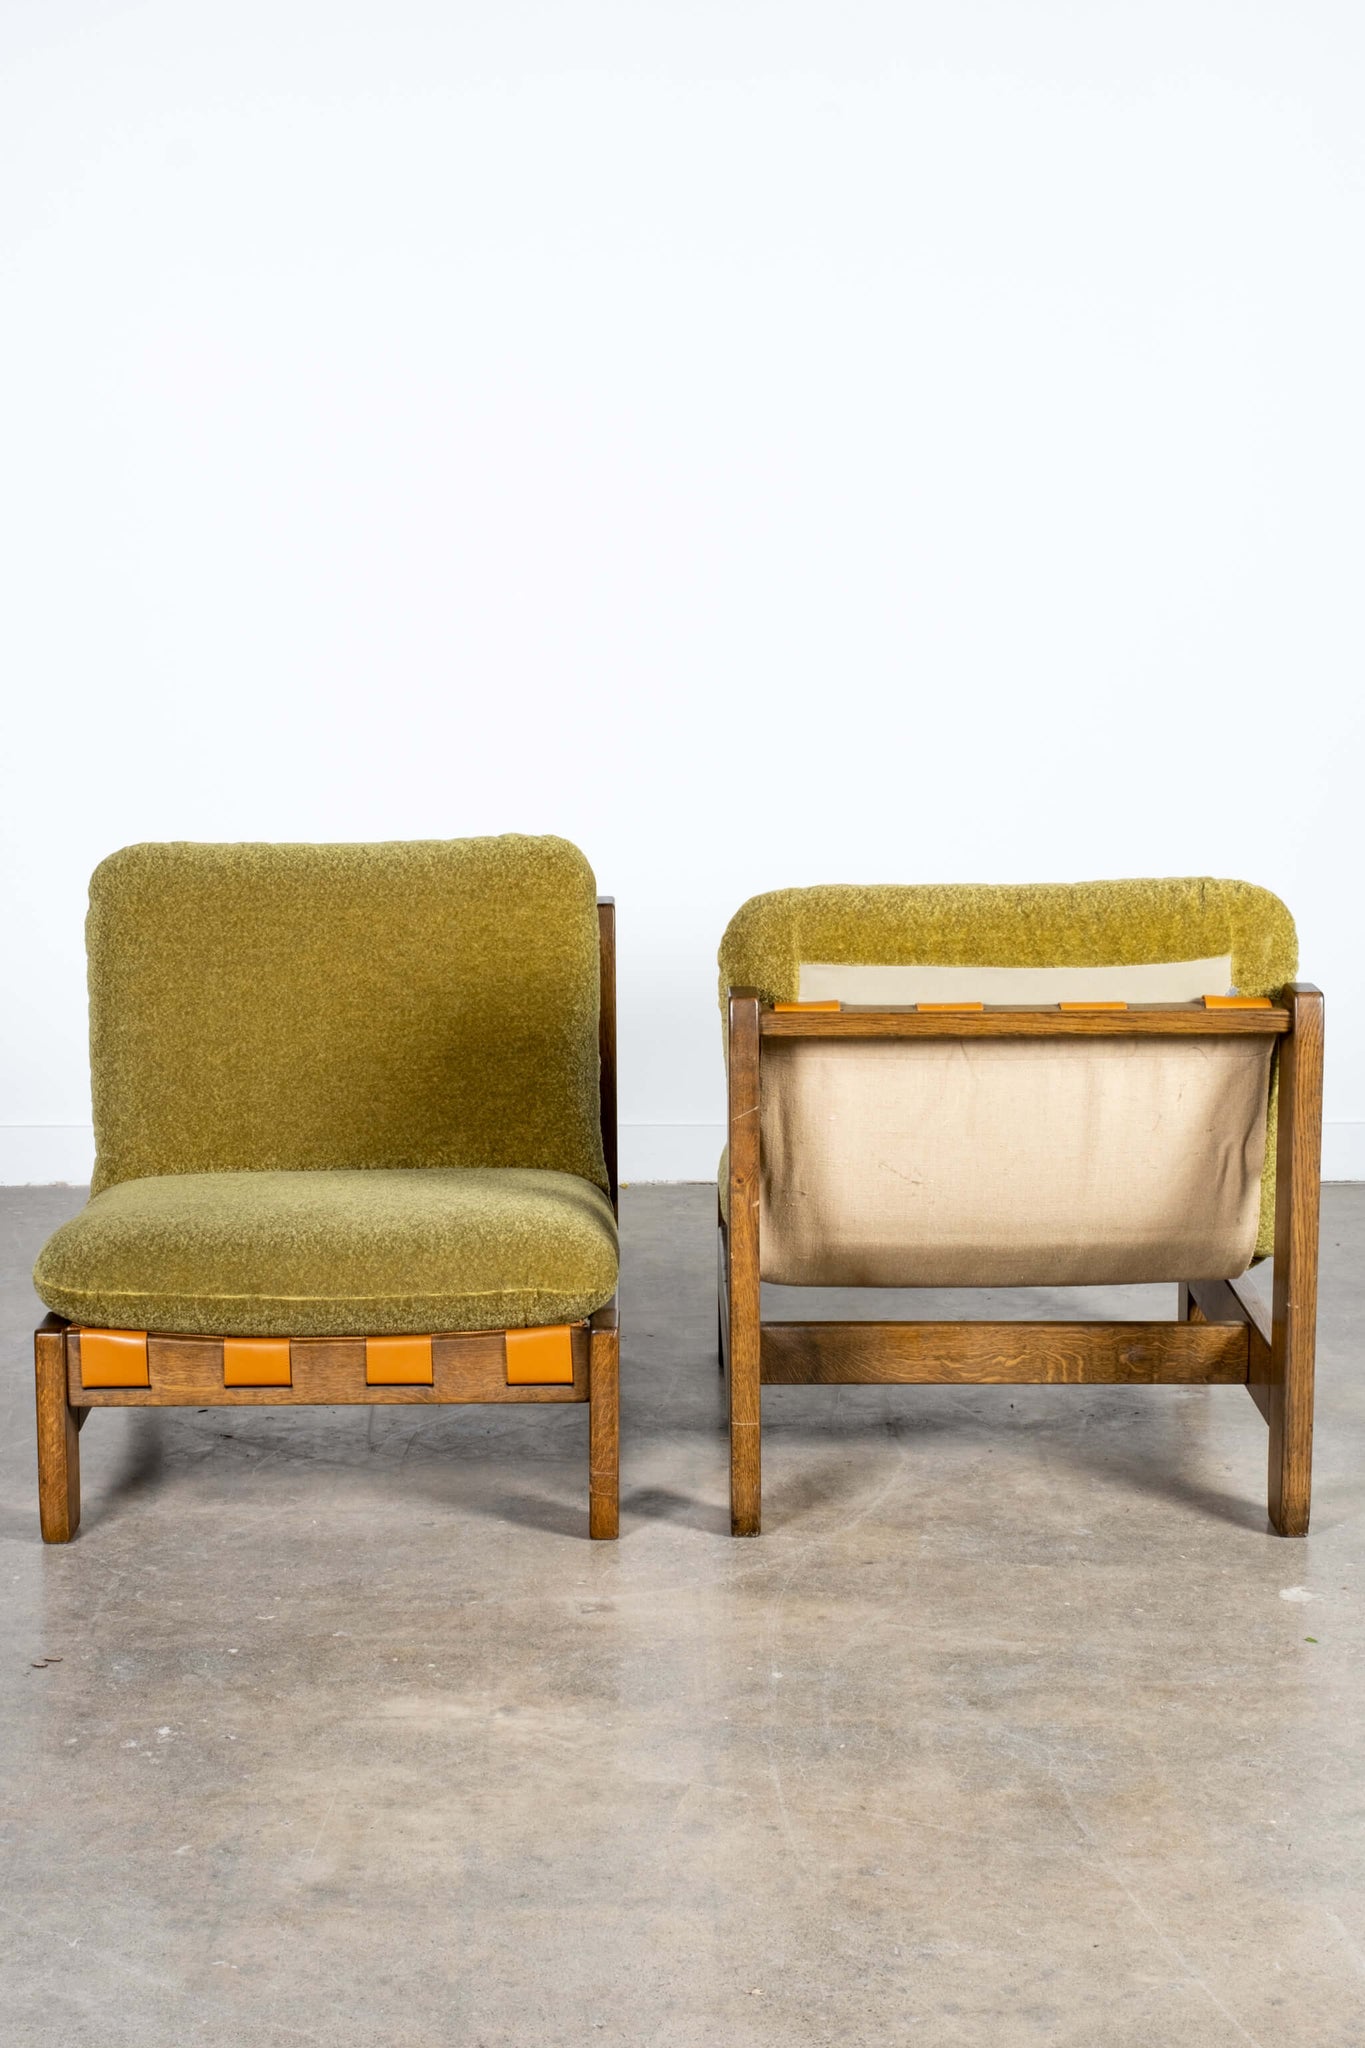 Vintage Pair of Green Sling Seat Chairs with Original Wool Fabric, front and back view